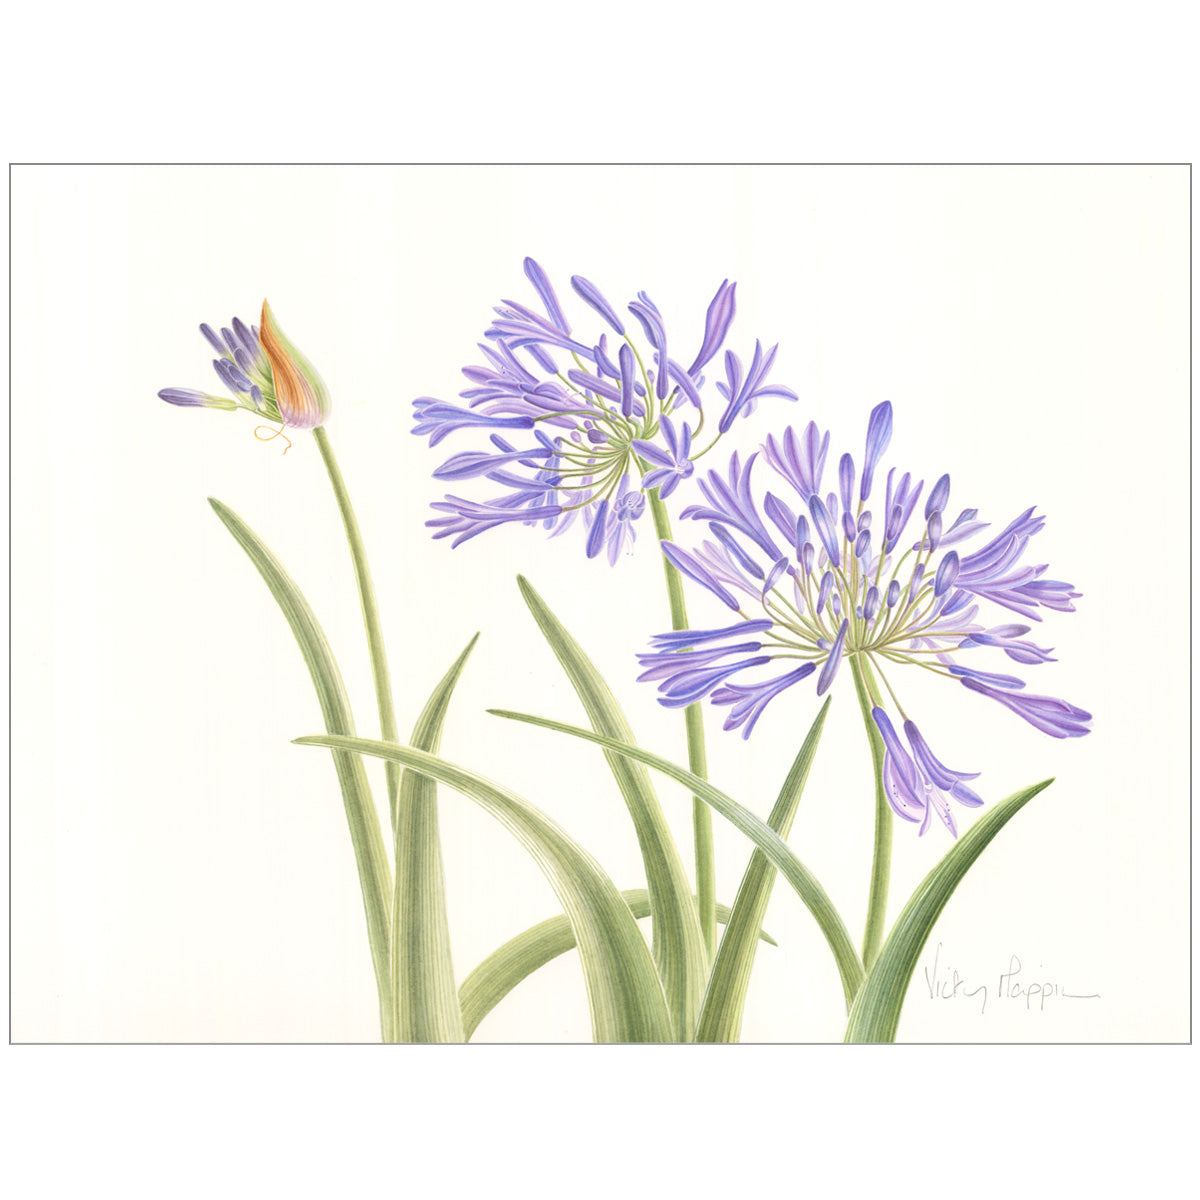 Agapanthus Painting By Vicky Mappin